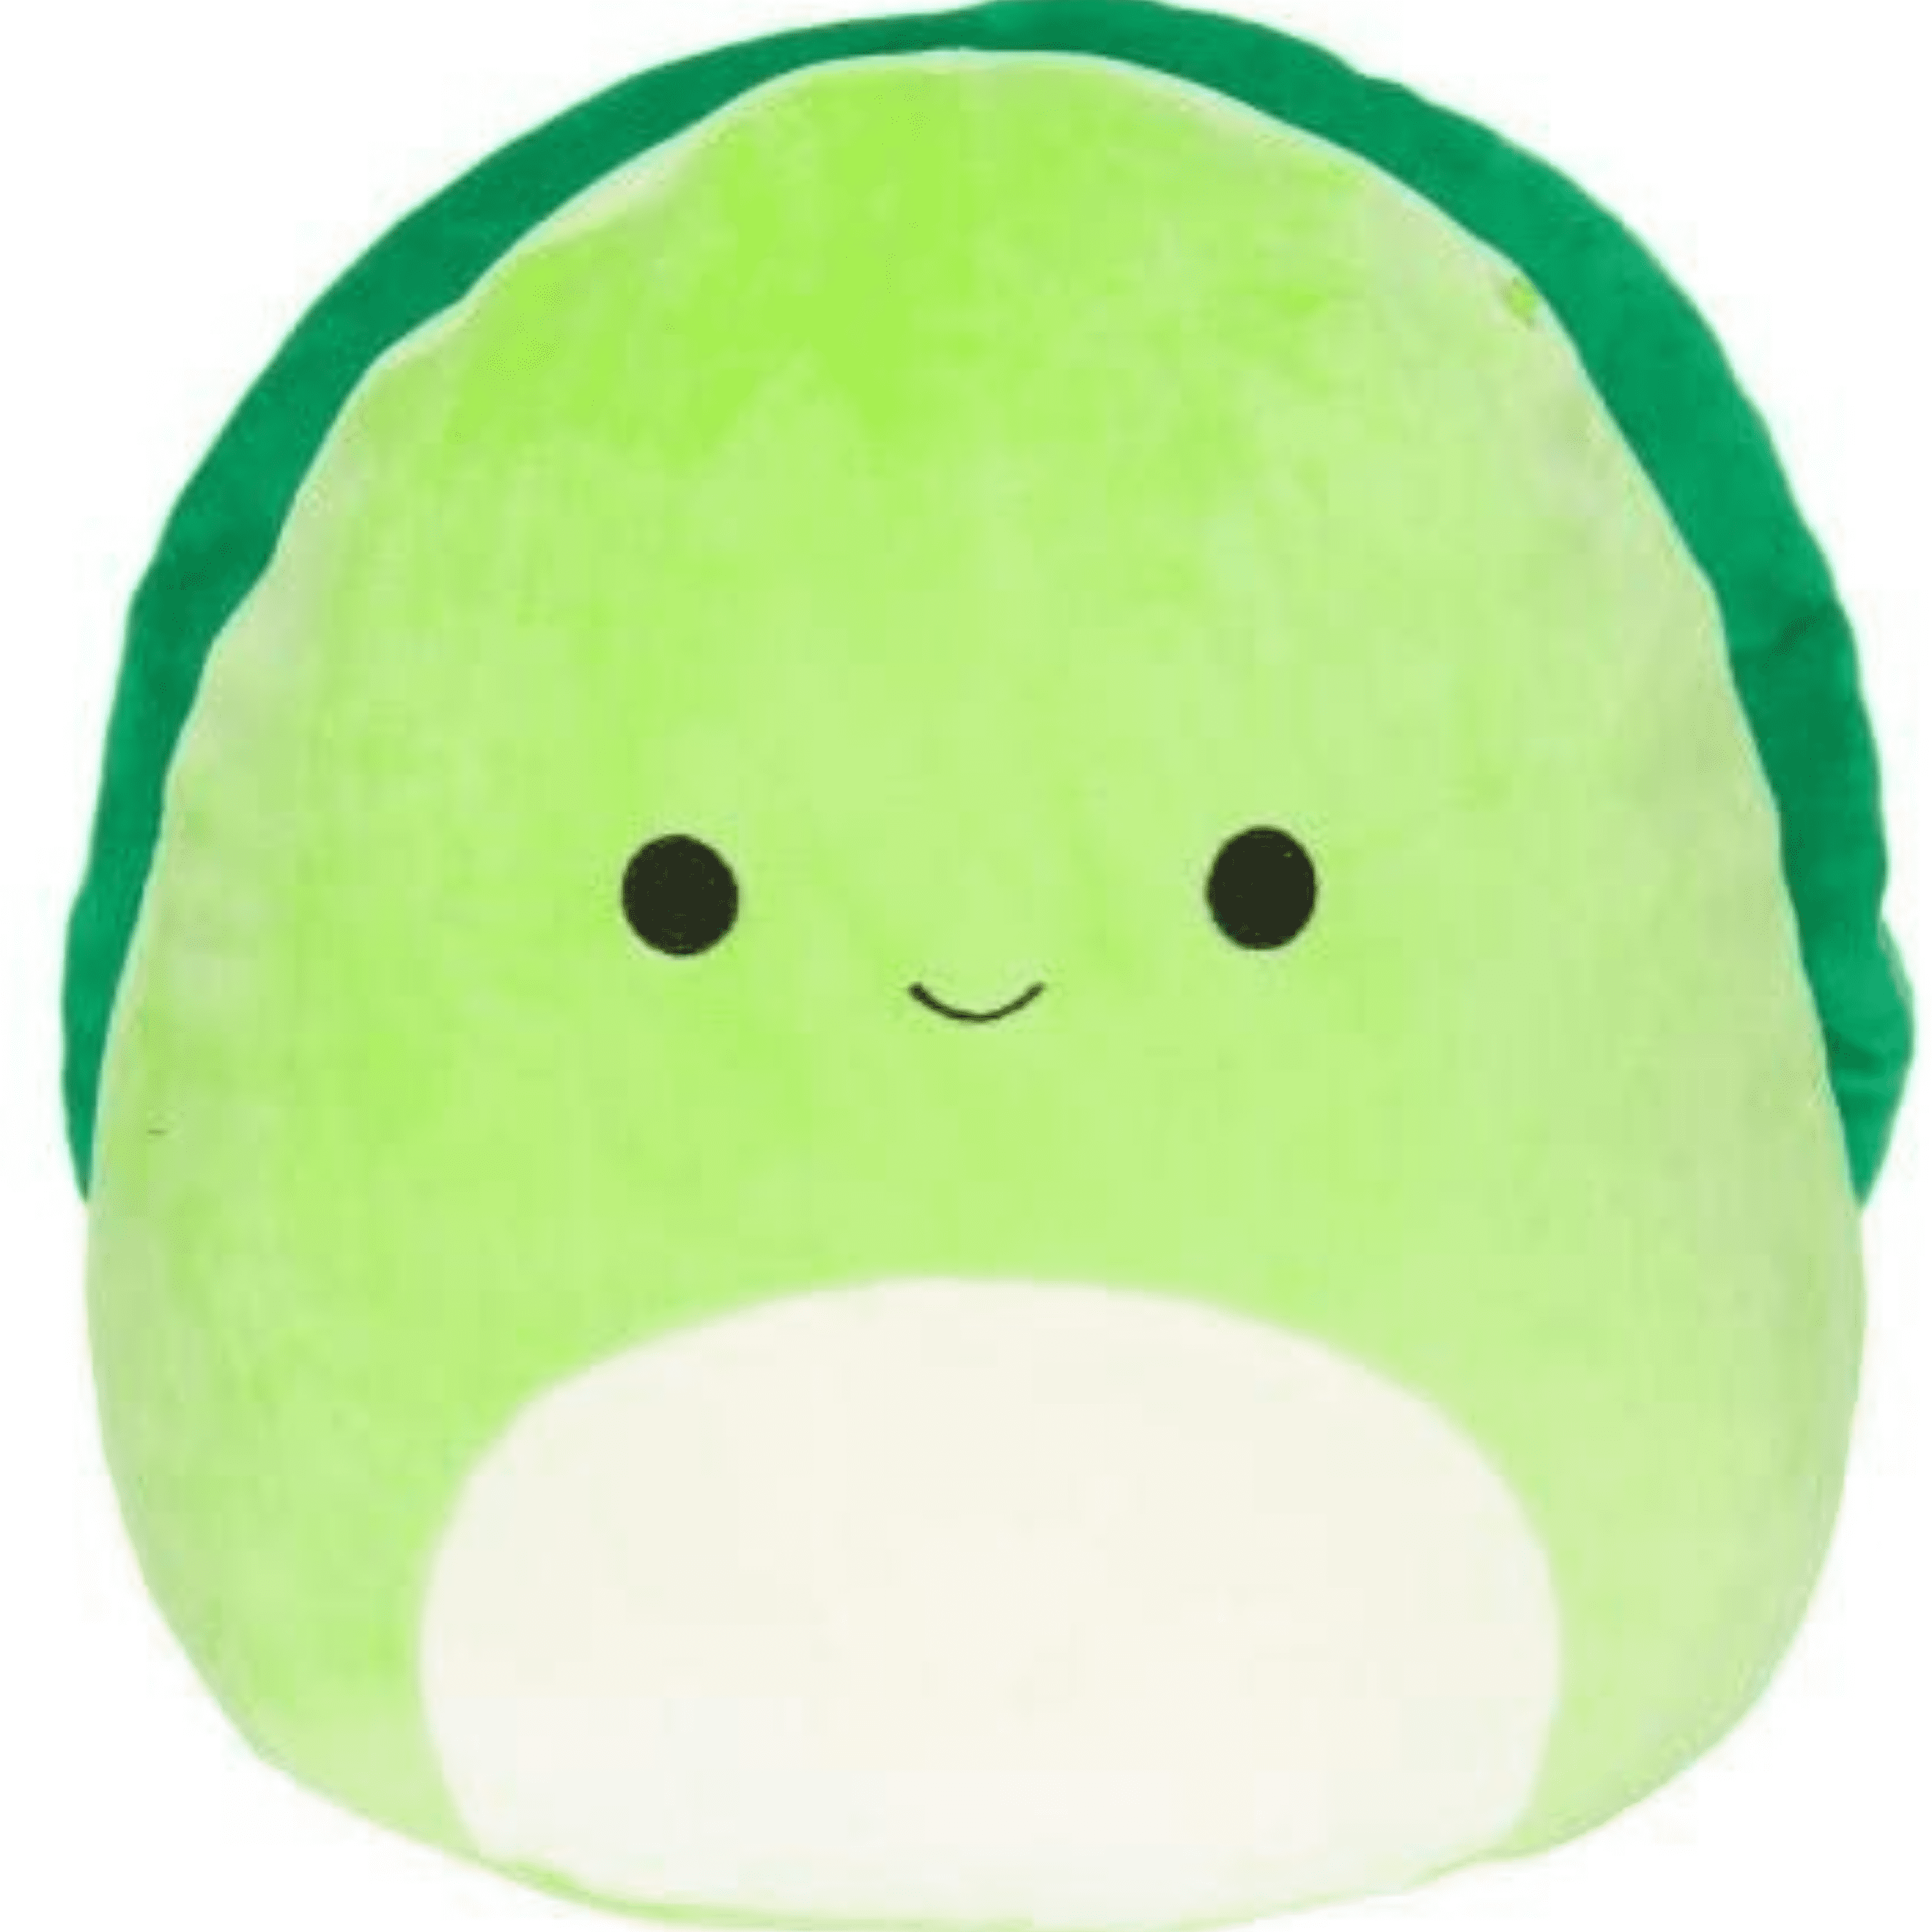 Squishmallows Herb The Turtle 16 inch Plush Toy for sale online 